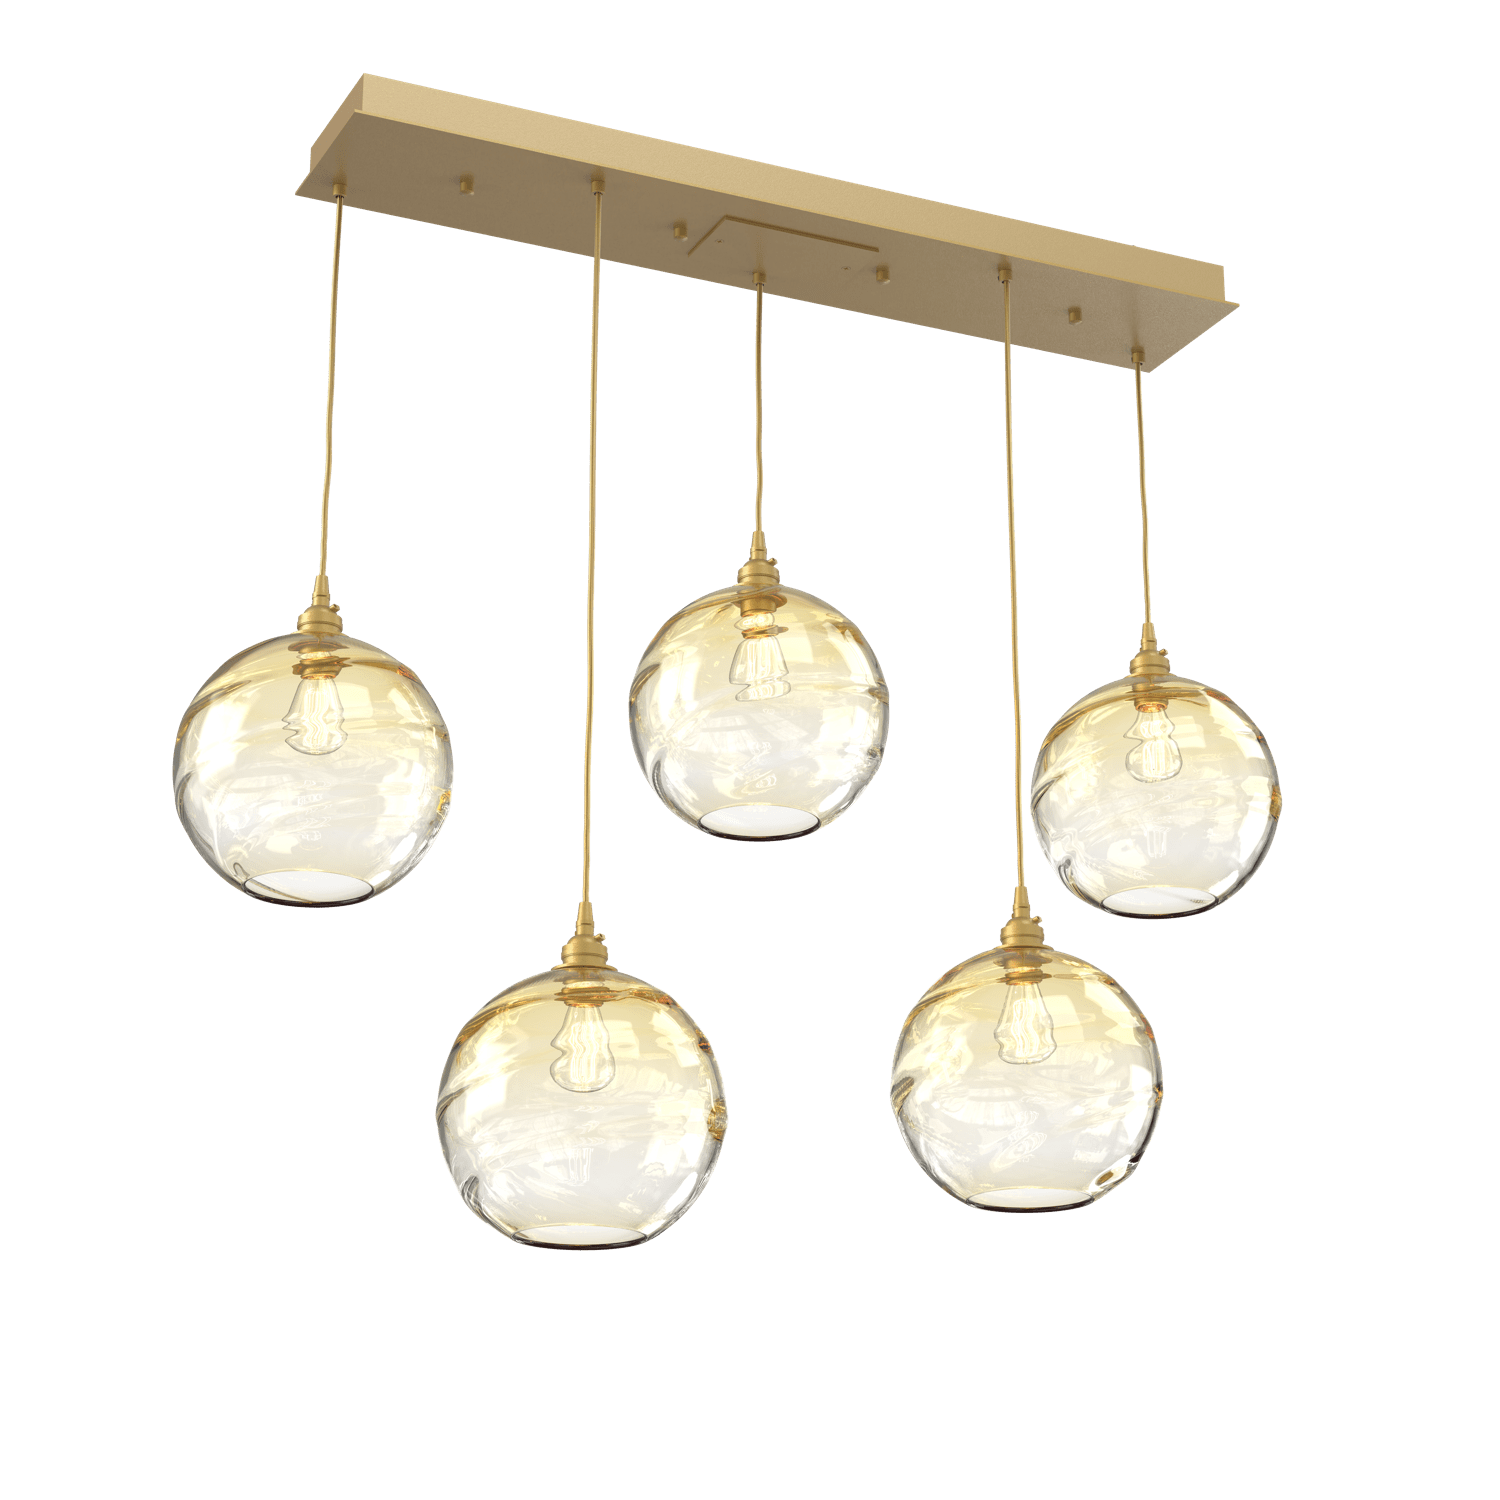 PLB0047-05-GB-OA-Hammerton-Studio-Optic-Blown-Glass-Terra-5-light-linear-pendant-chandelier-with-gilded-brass-finish-and-optic-amber-blown-glass-shades-and-incandescent-lamping